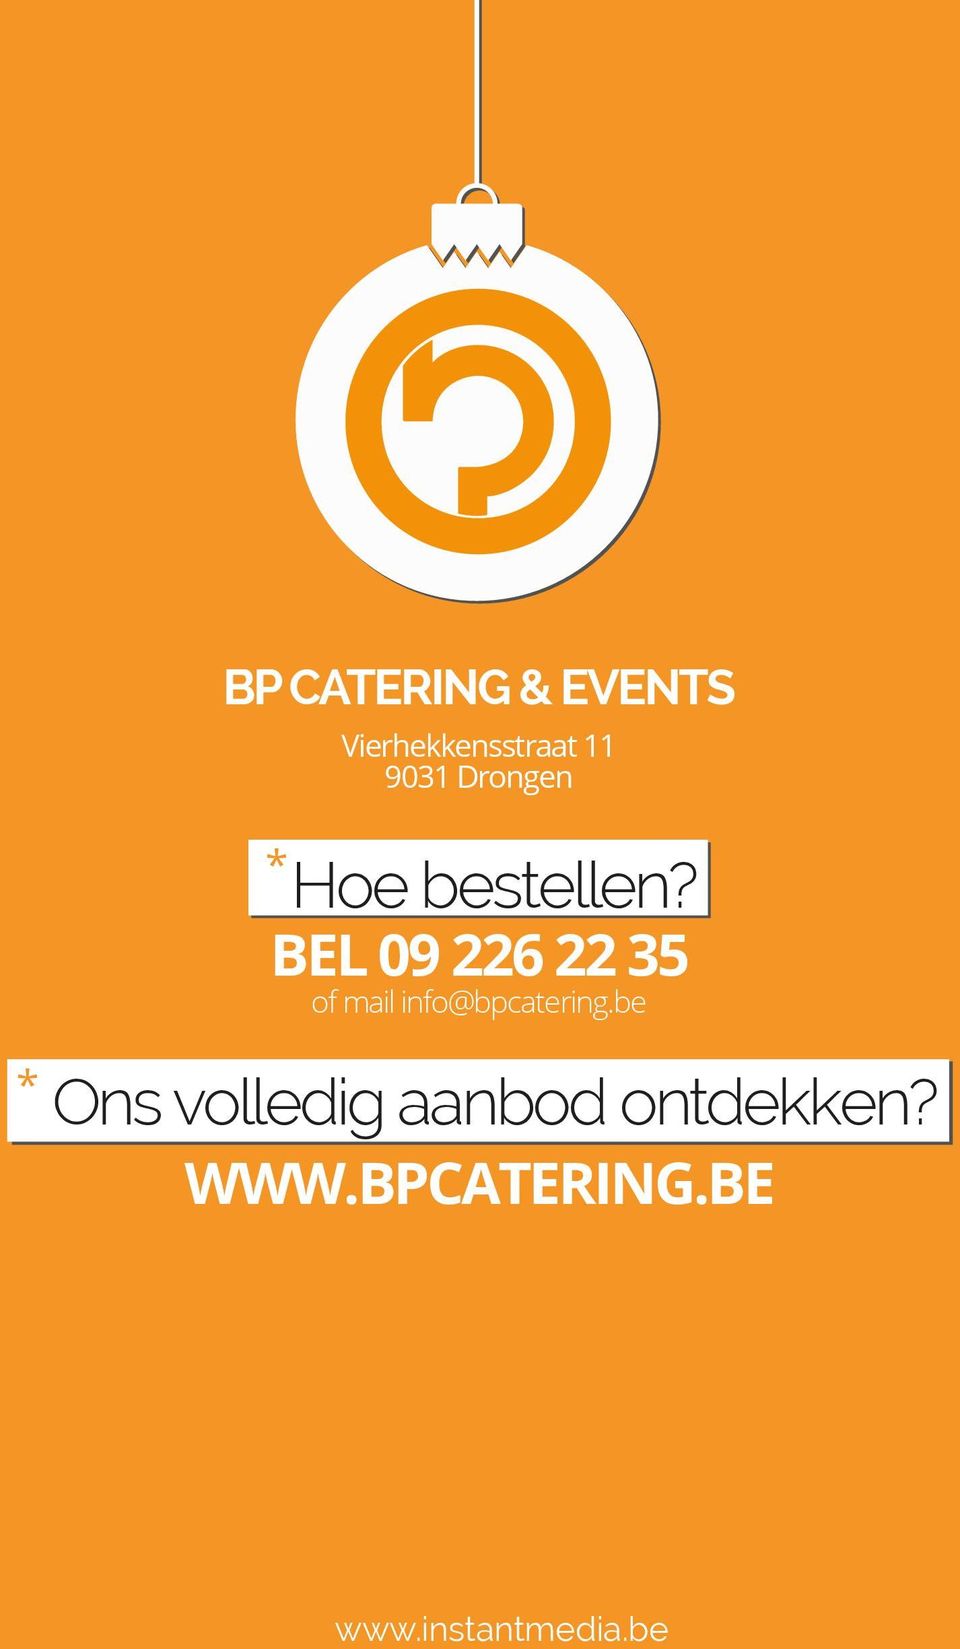 BEL 09 226 22 35 of mail info@bpcatering.